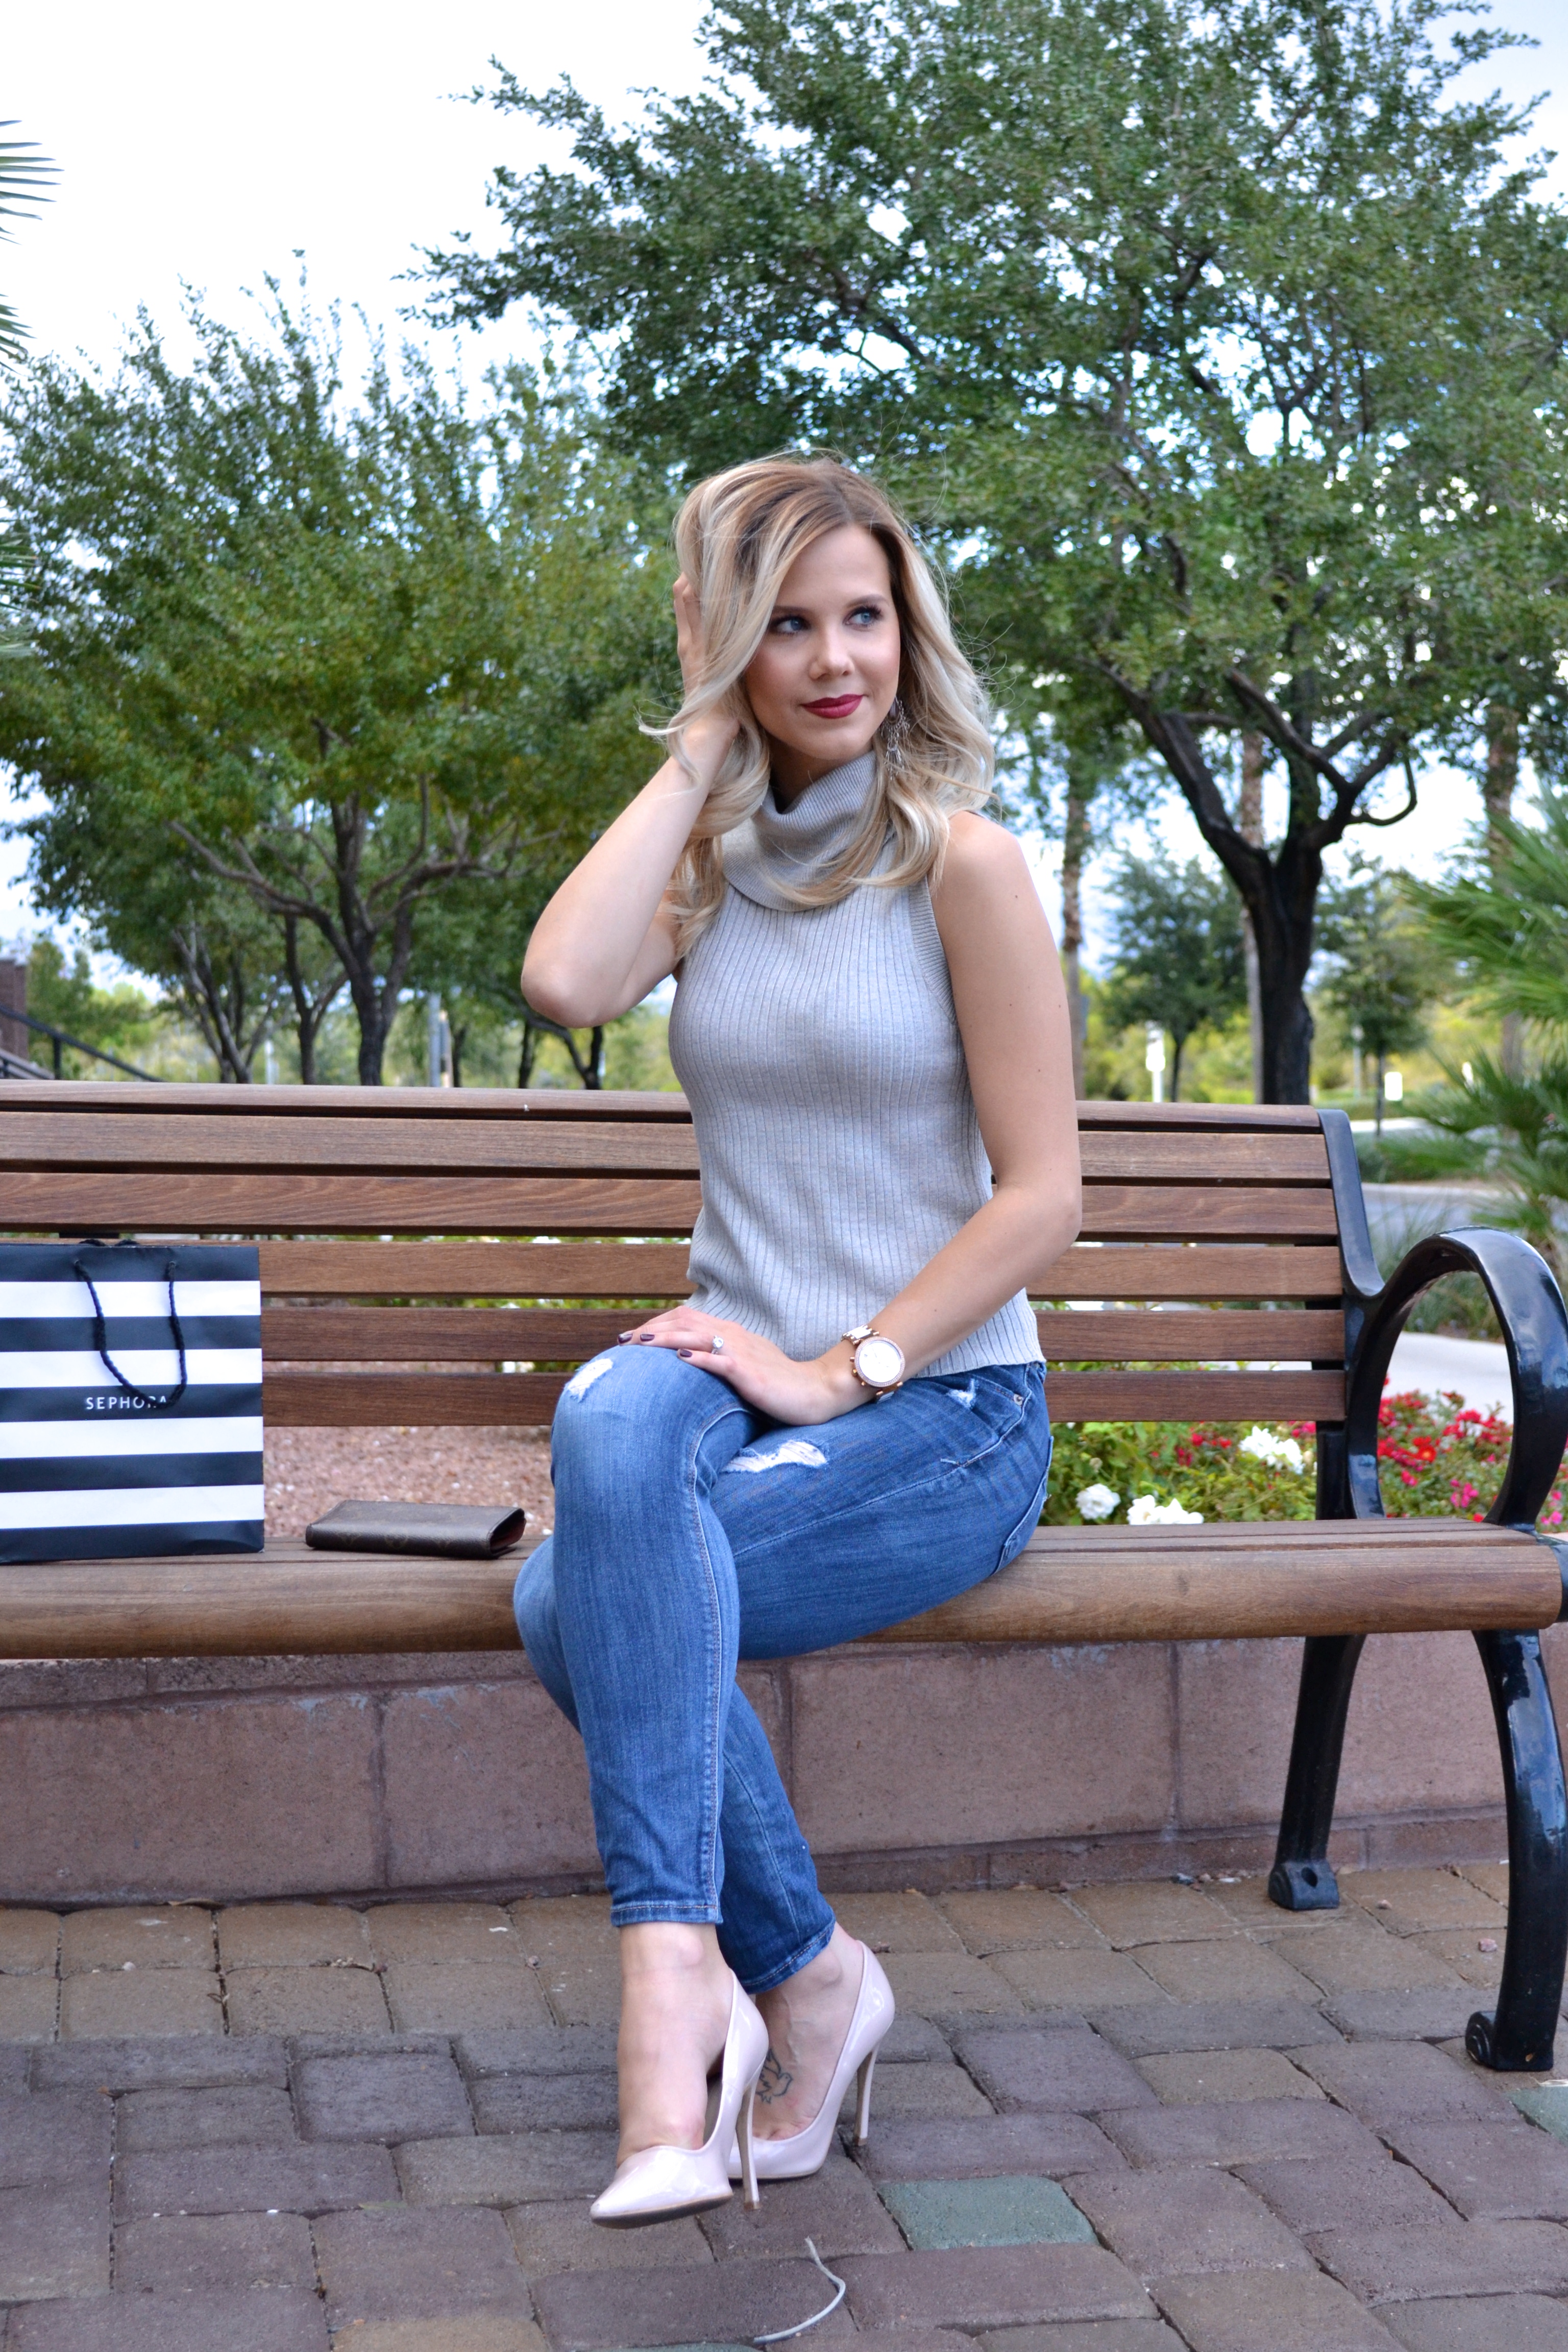 sleeveless sweater in ripped jeans |5 Ways to Treat Yourself Today|